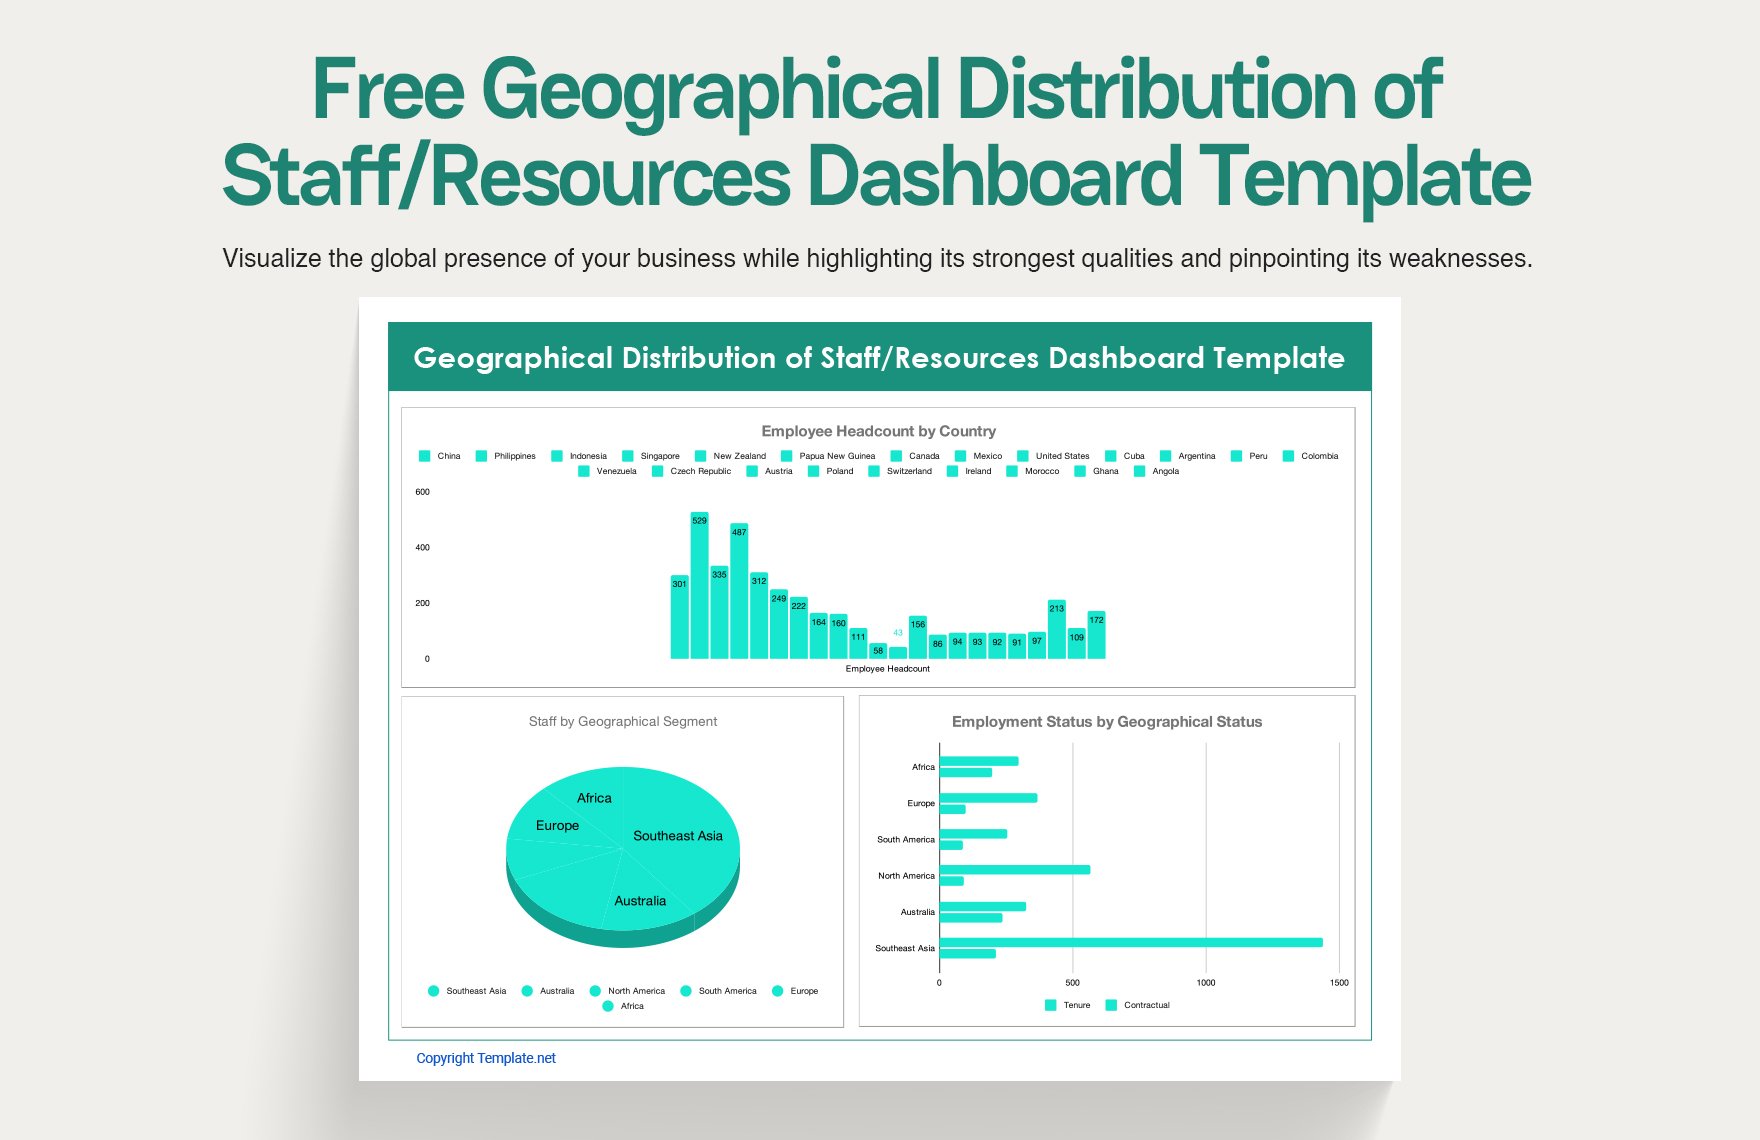 Free Geographical Distribution of Staff/Resources Dashboard Template